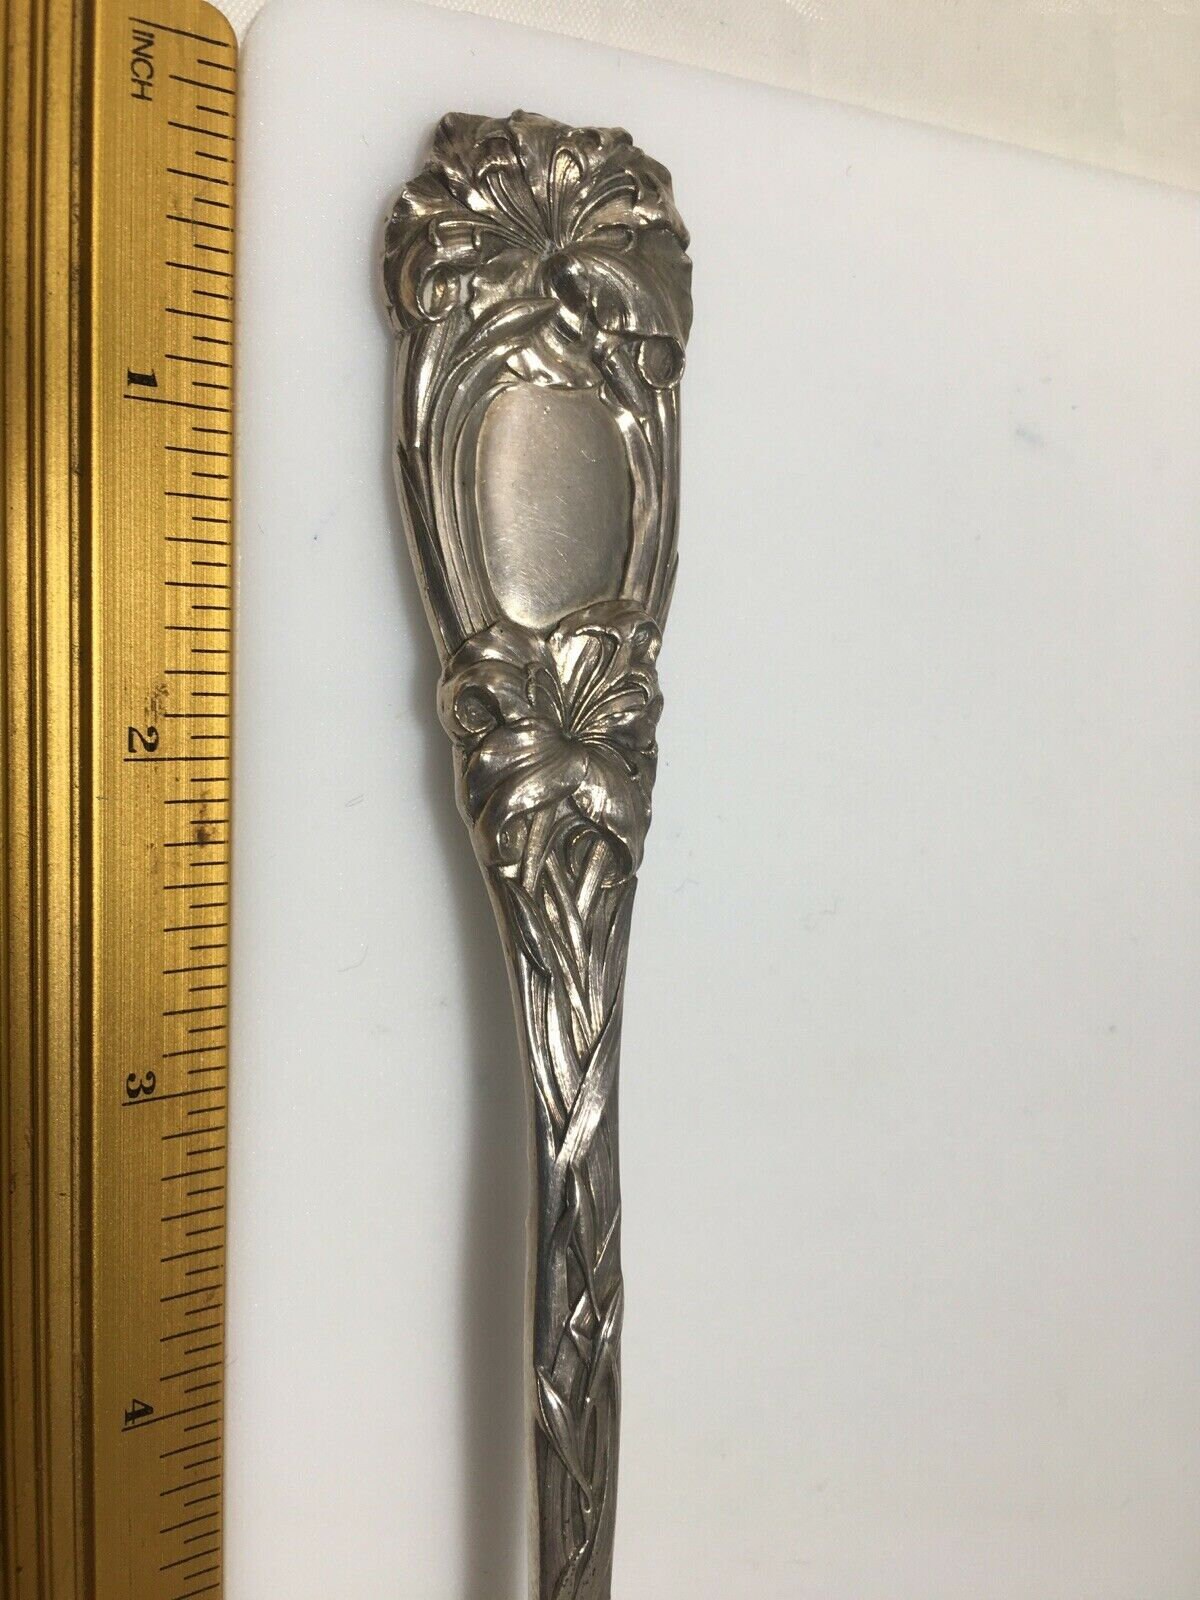 New Art By Durgin Art Nouveau Sterling Silver Large Heavy Berry Spoon 8.75”